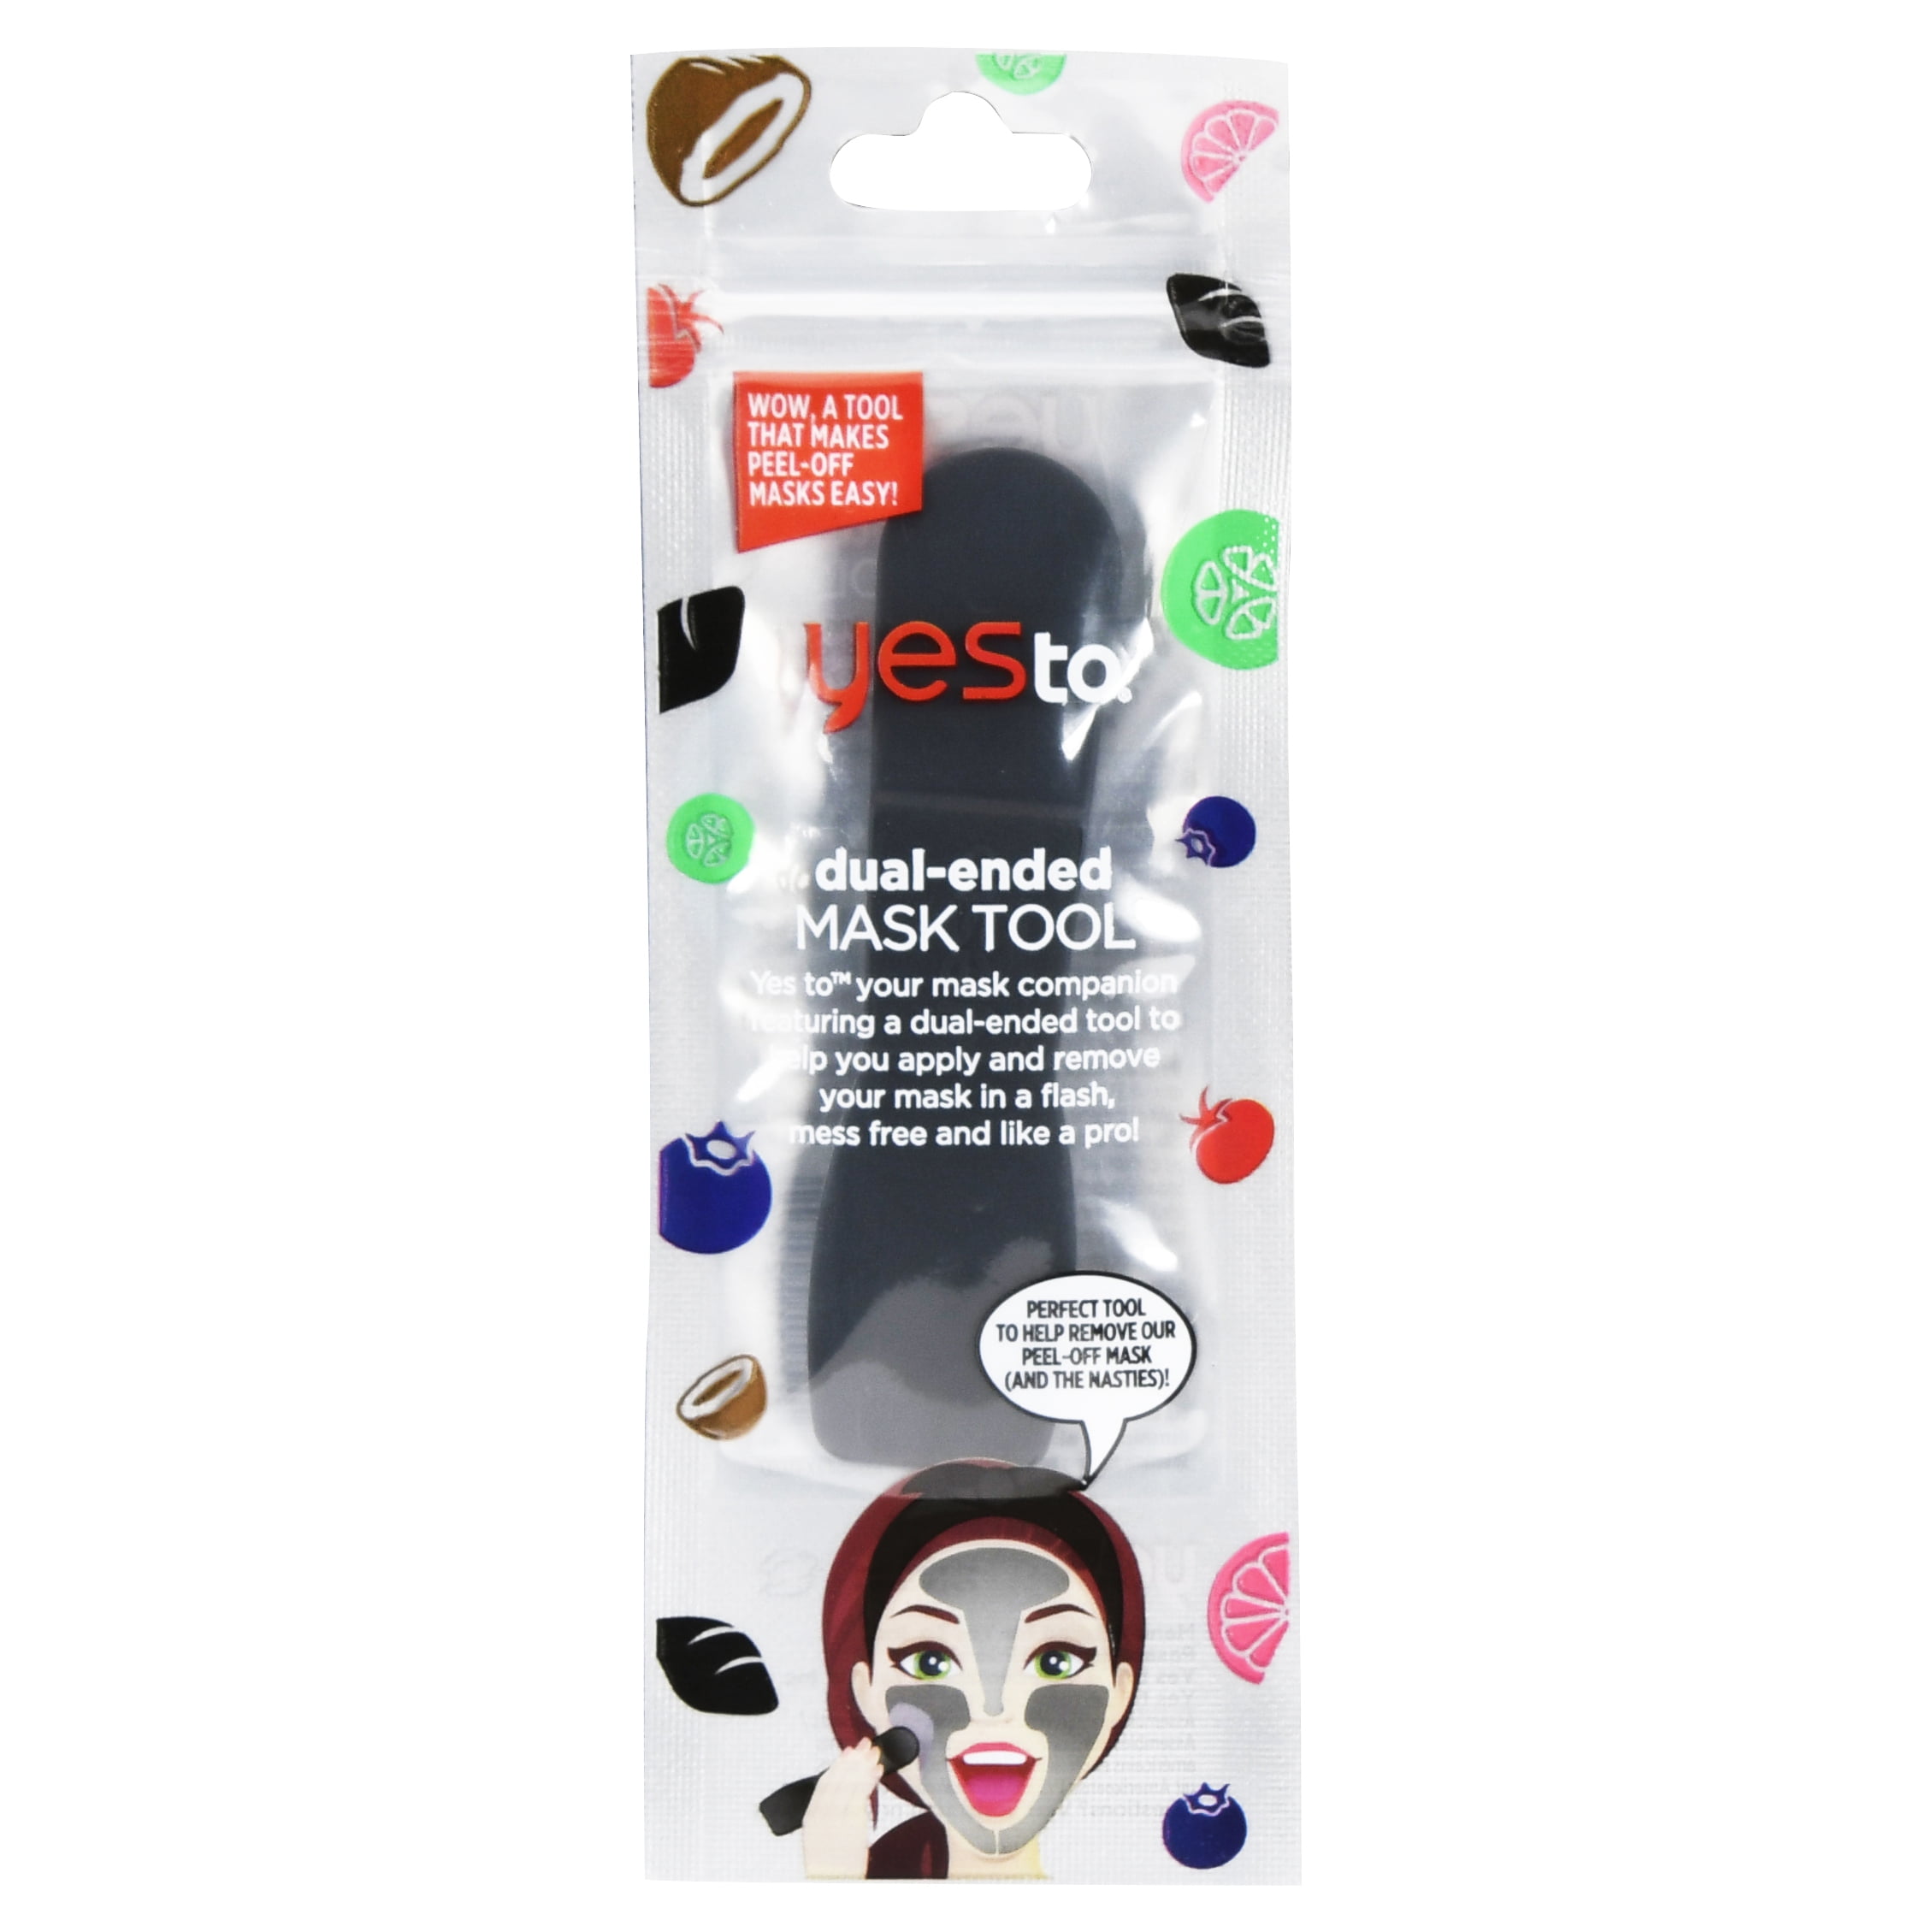 Yes To Dual-Ended Face Mask Application & Removal Tool